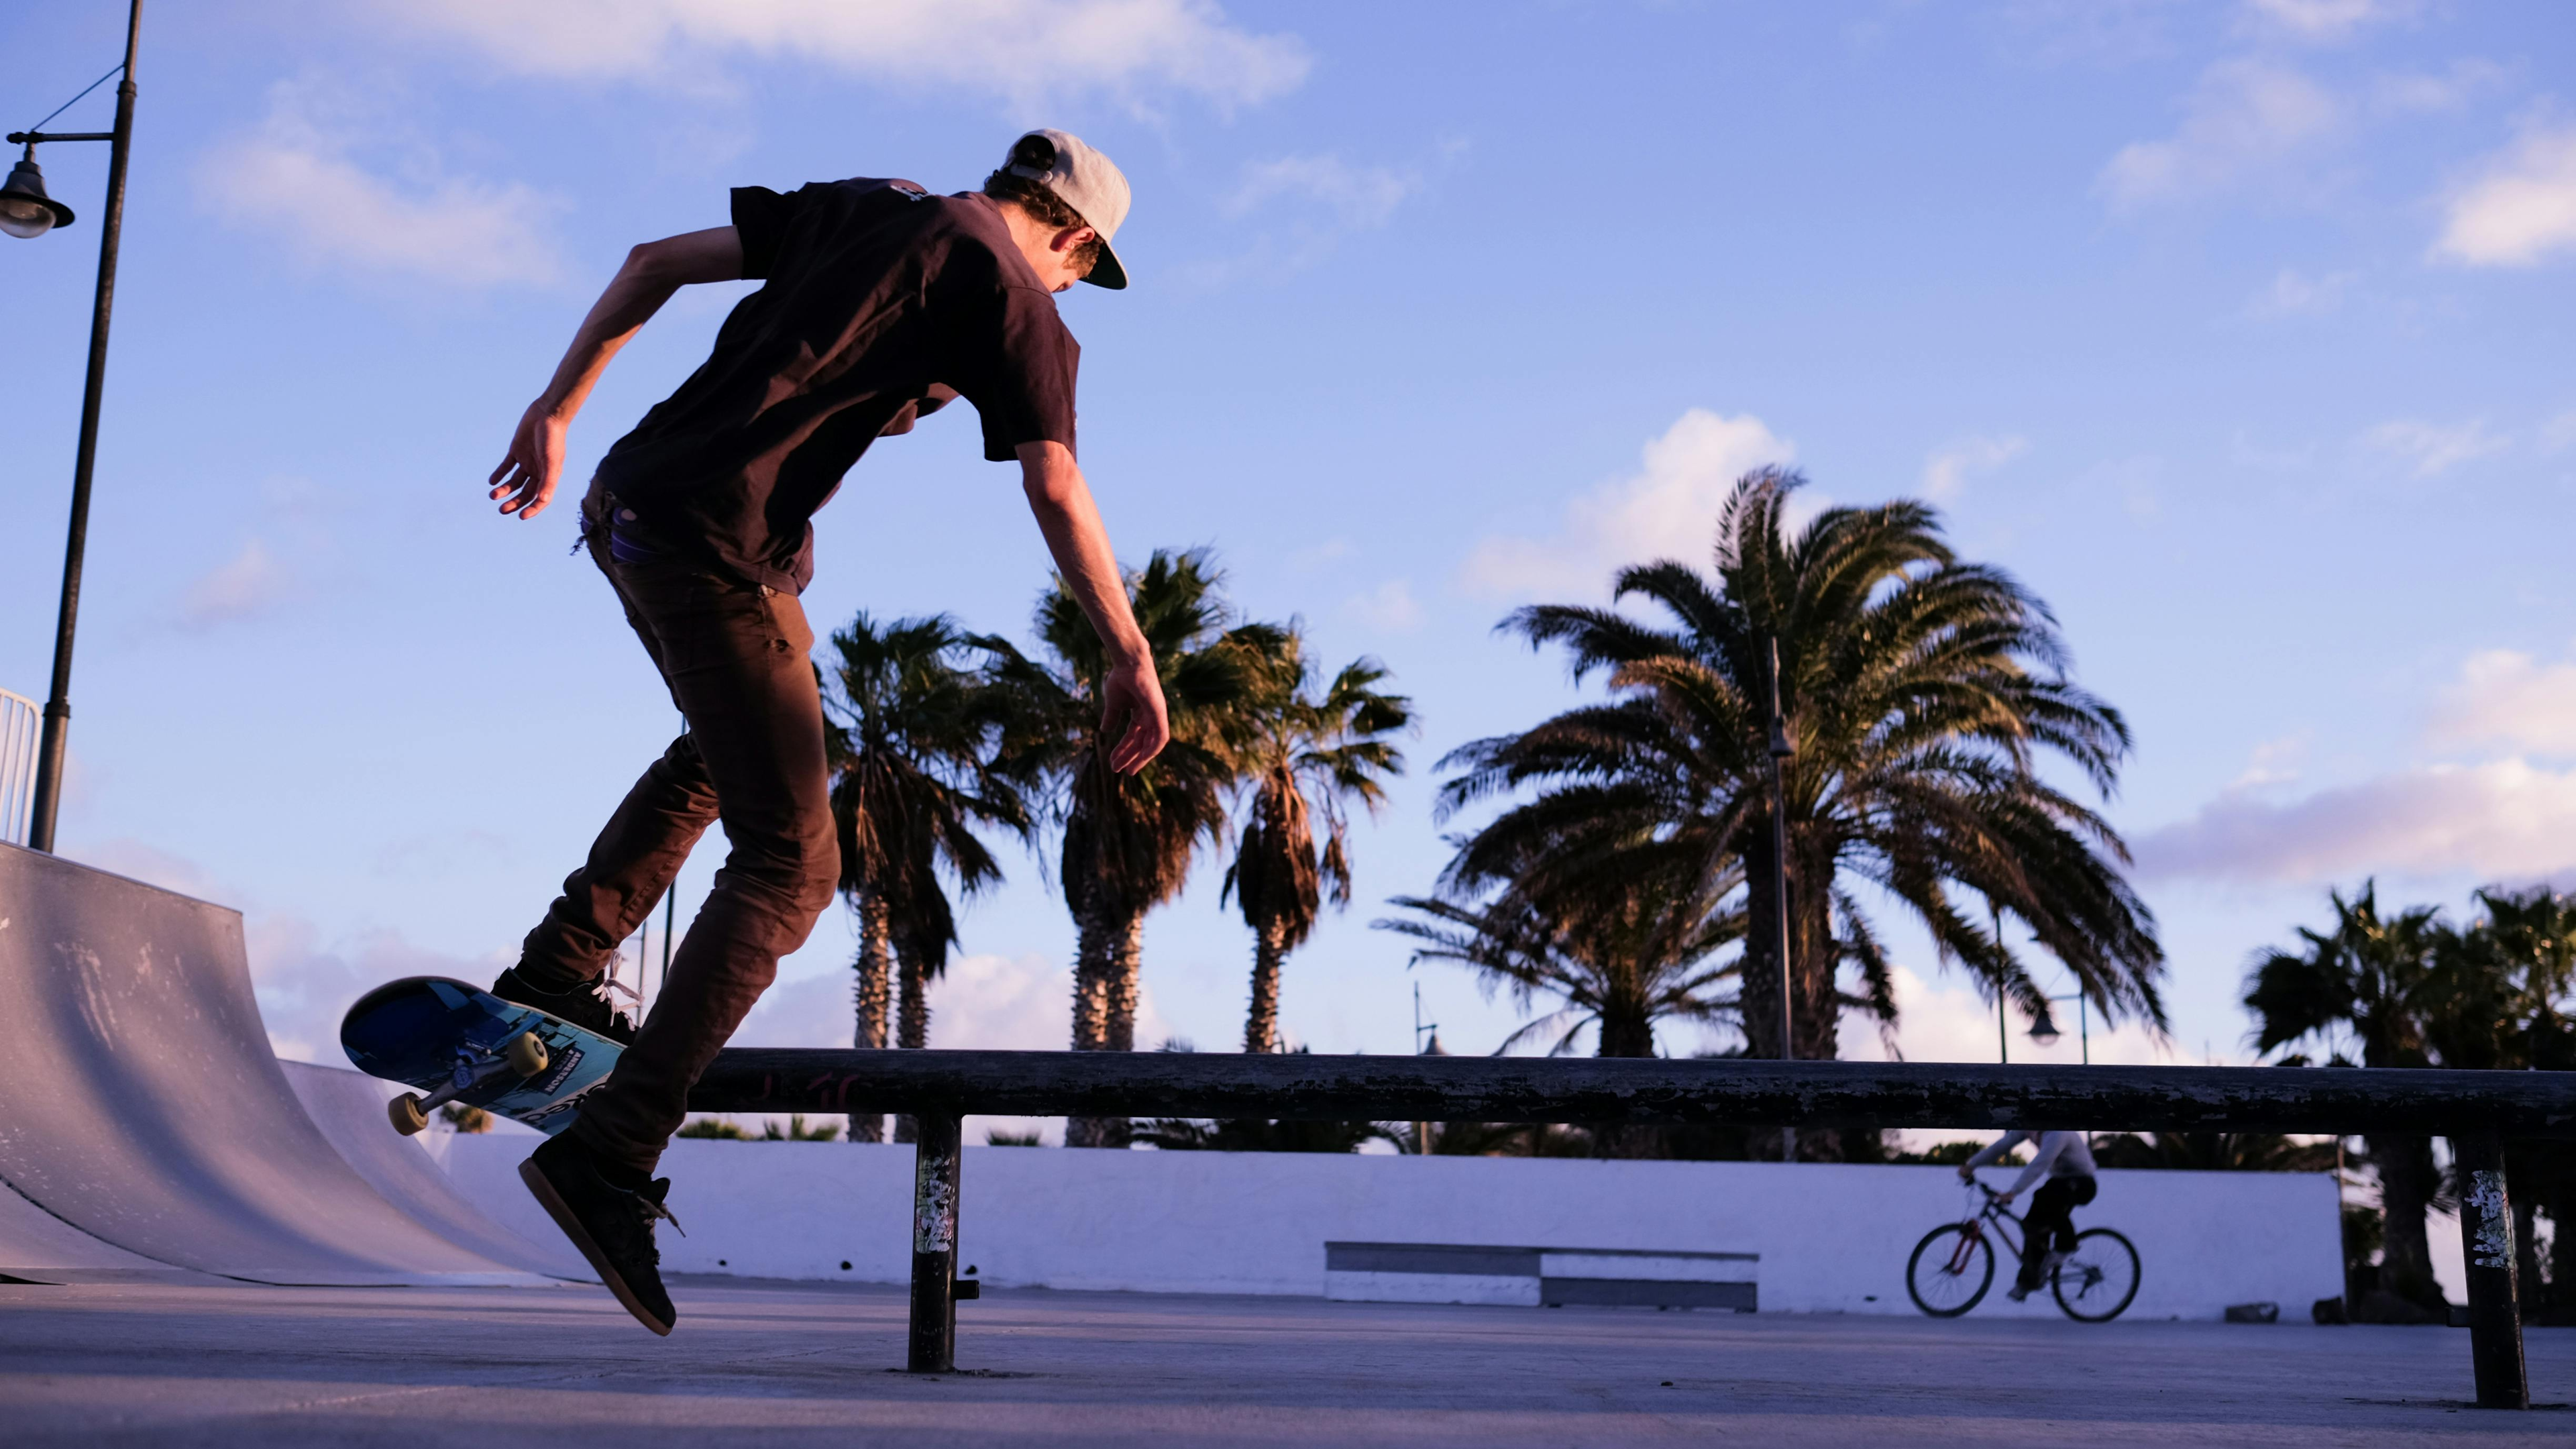 Professional skateboarders have become more common as skateboarding has become more accepted